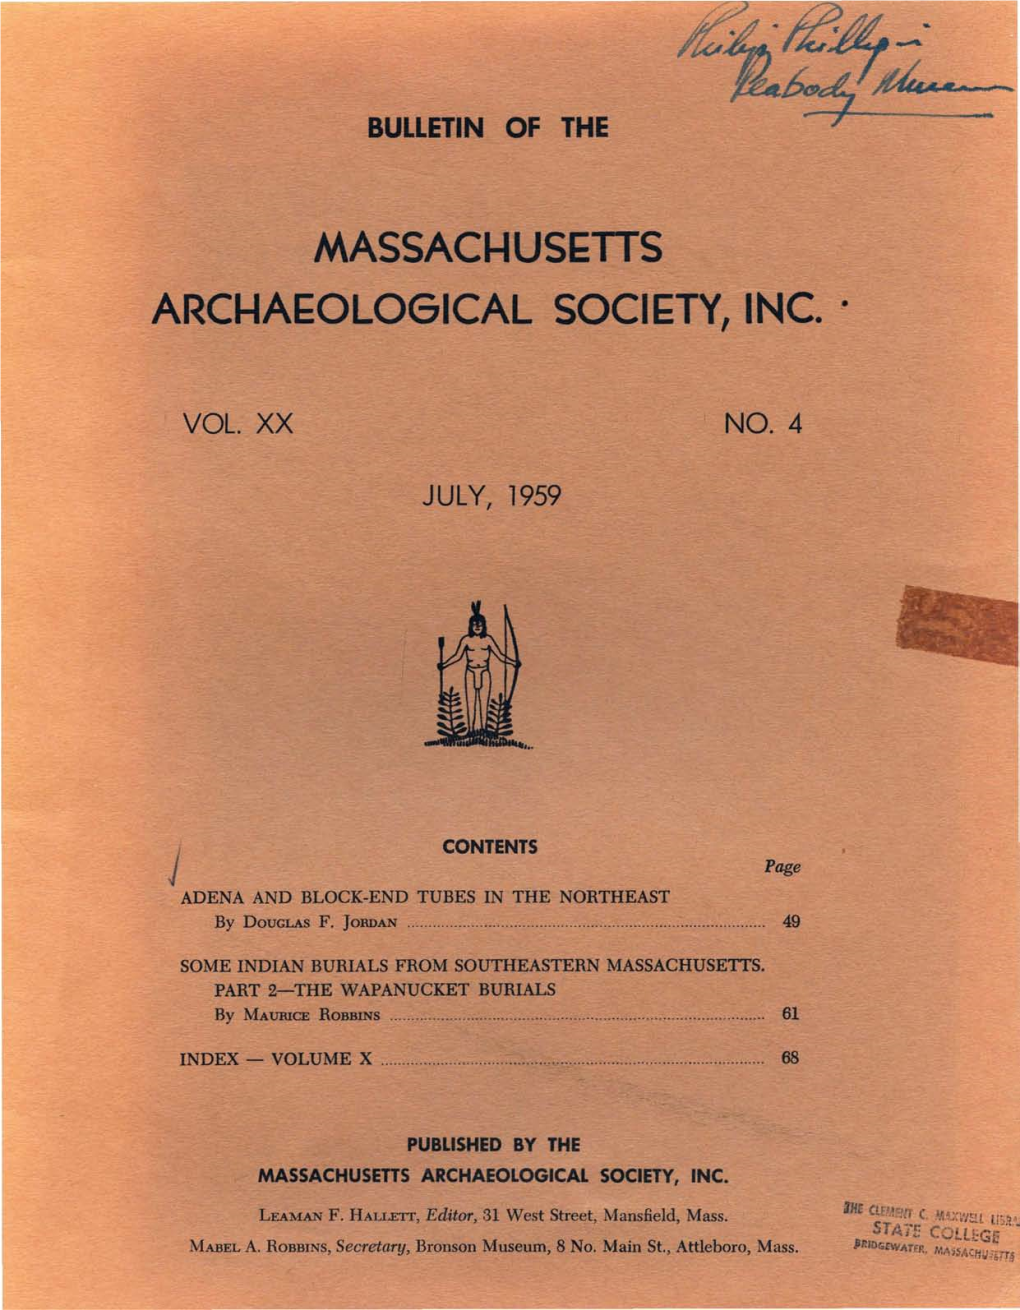 Bulletin of the Massachusetts Archaeological Society, Vol. 20, No